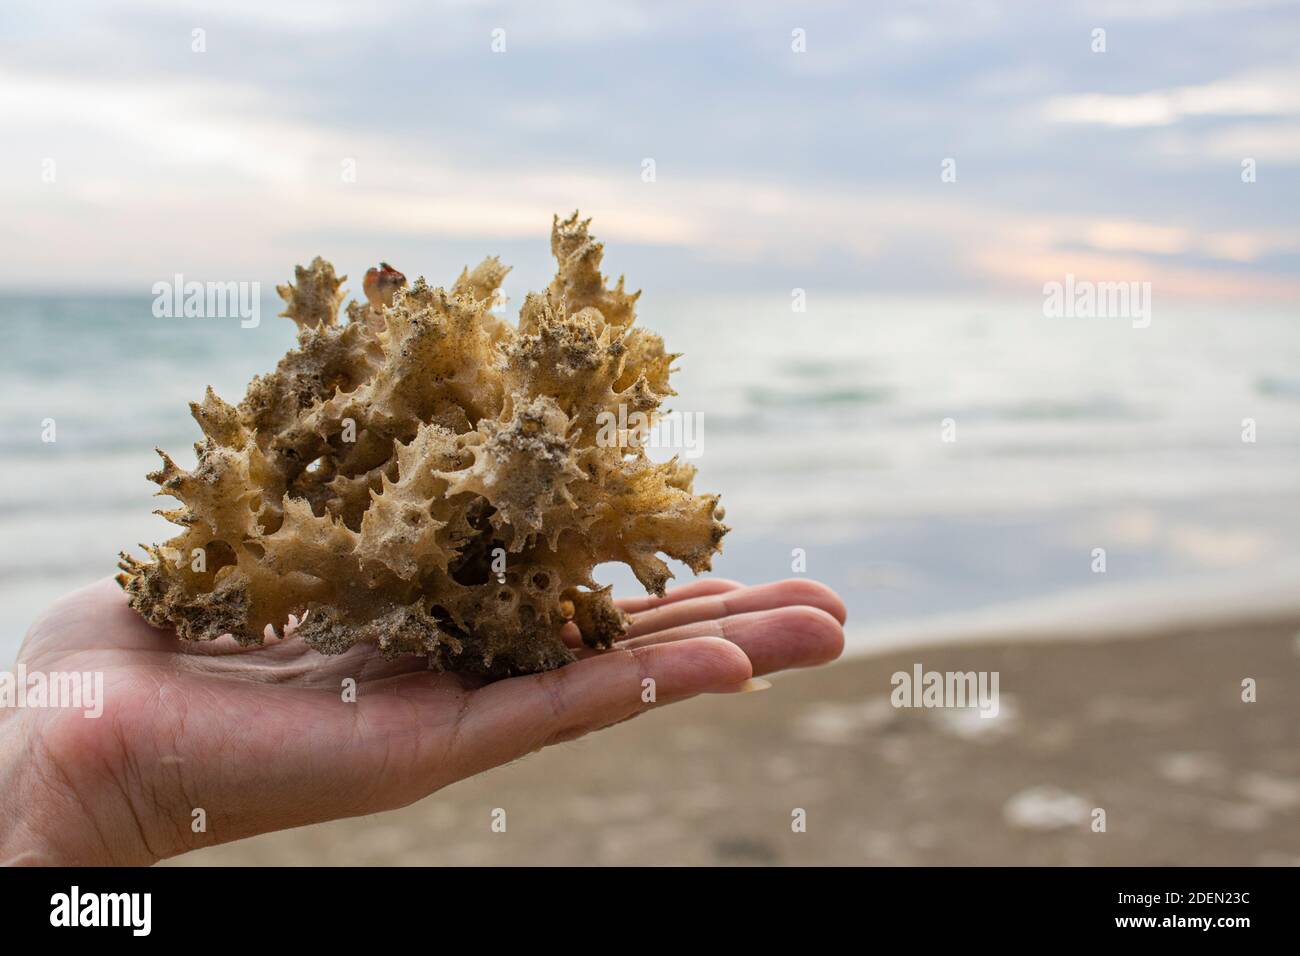 Sea anemone in the hand with the sea background and copy space. Stock Photo